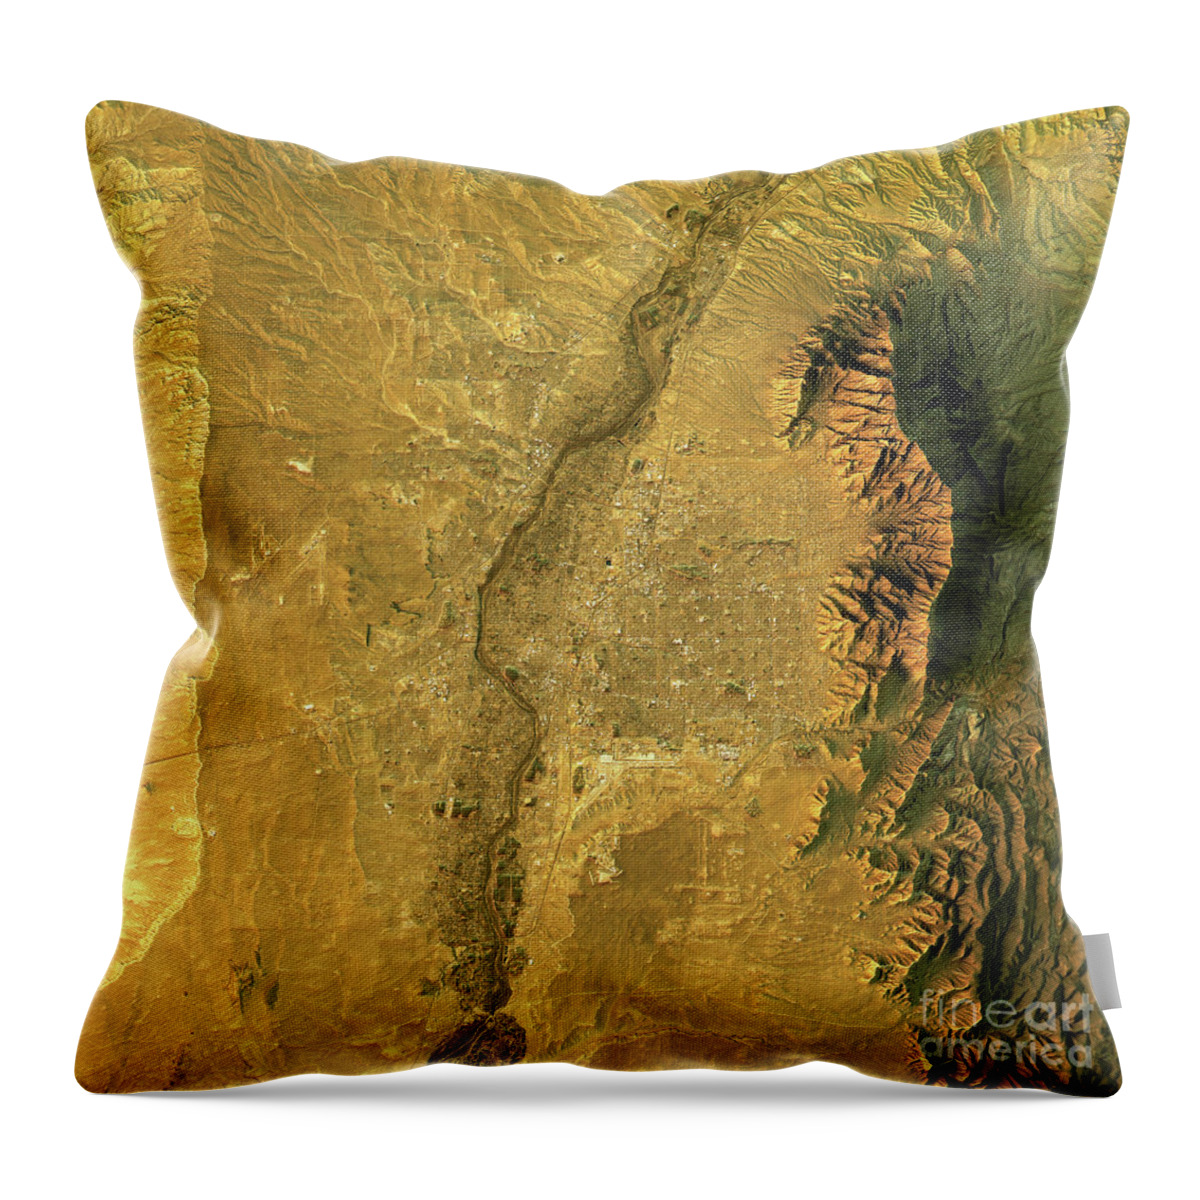 Albuquerque Throw Pillow featuring the digital art Albuquerque Topographic Map Natural Color Top View by Frank Ramspott